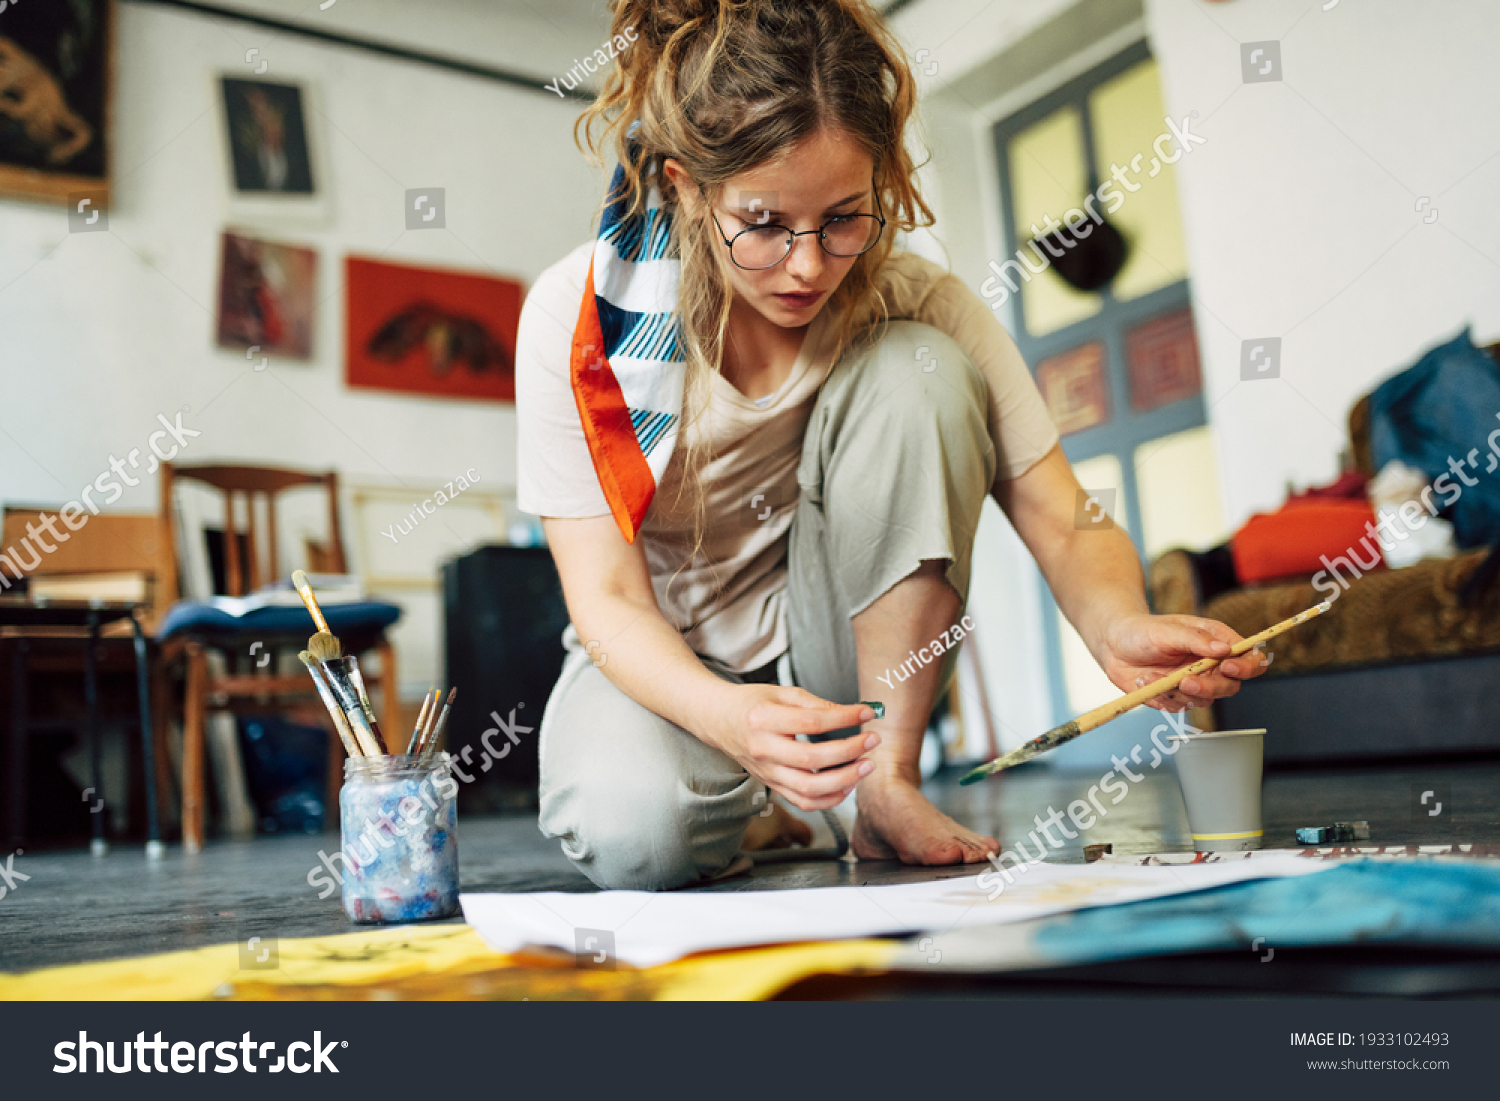 Horizontal image of a pretty female artist sitting on the floor in the art studio and painting on paper with a brush. A woman painter with glasses painting with watercolors in the workshop. #1933102493